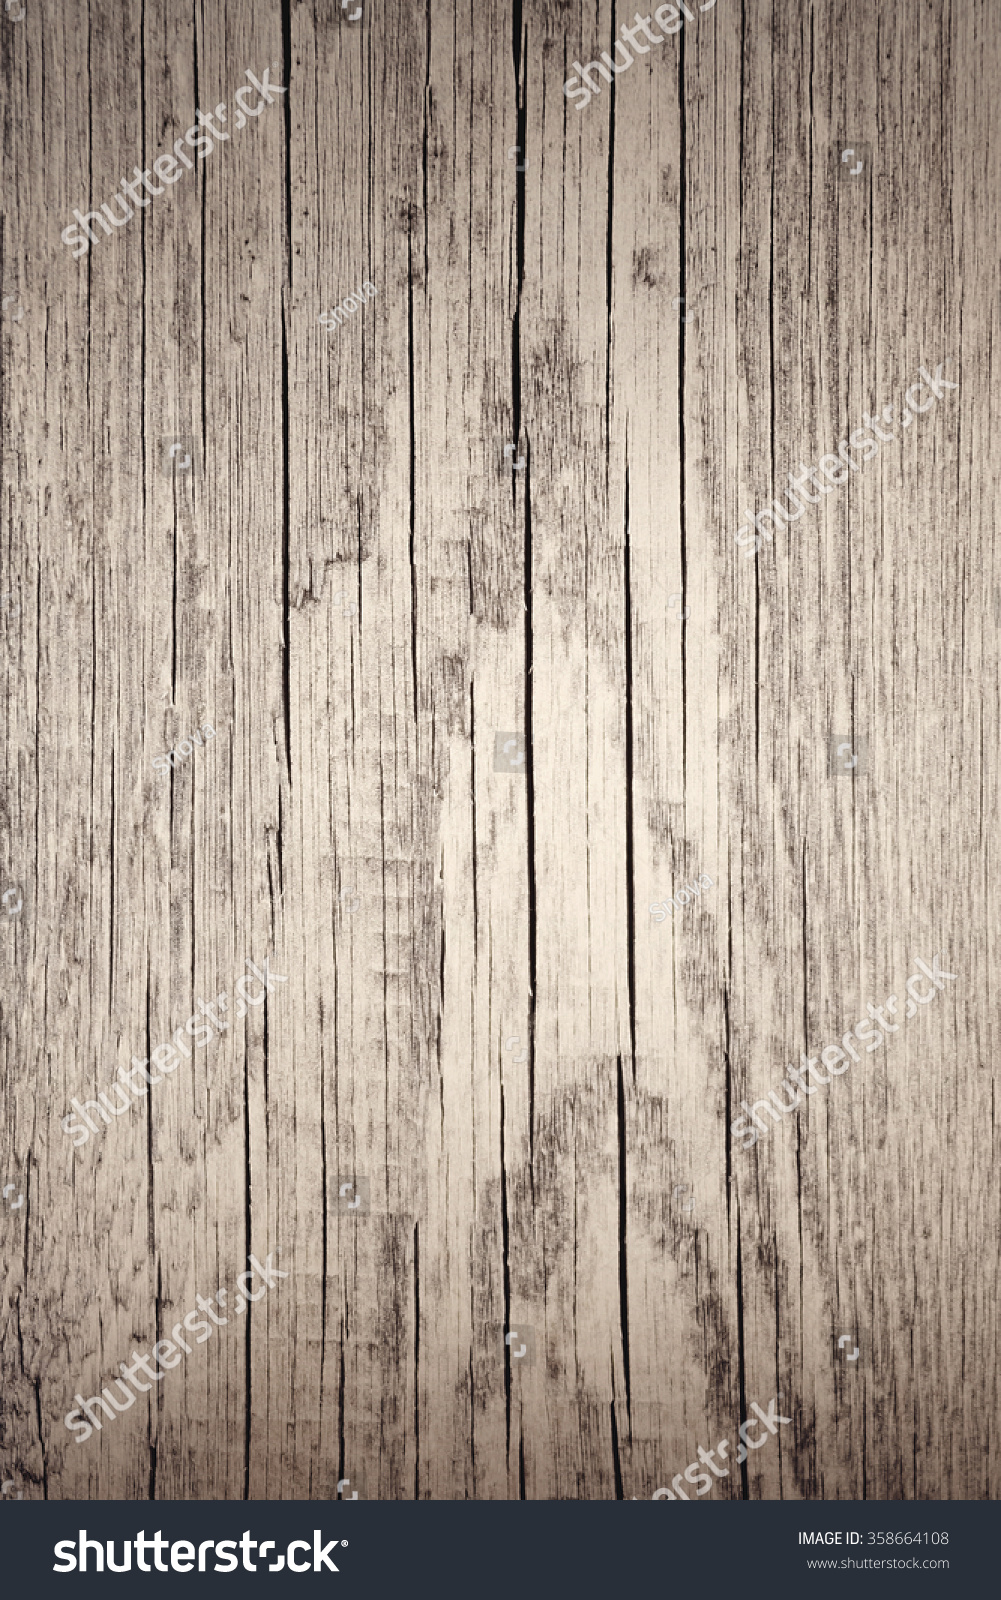 Rough wooden surface #358664108